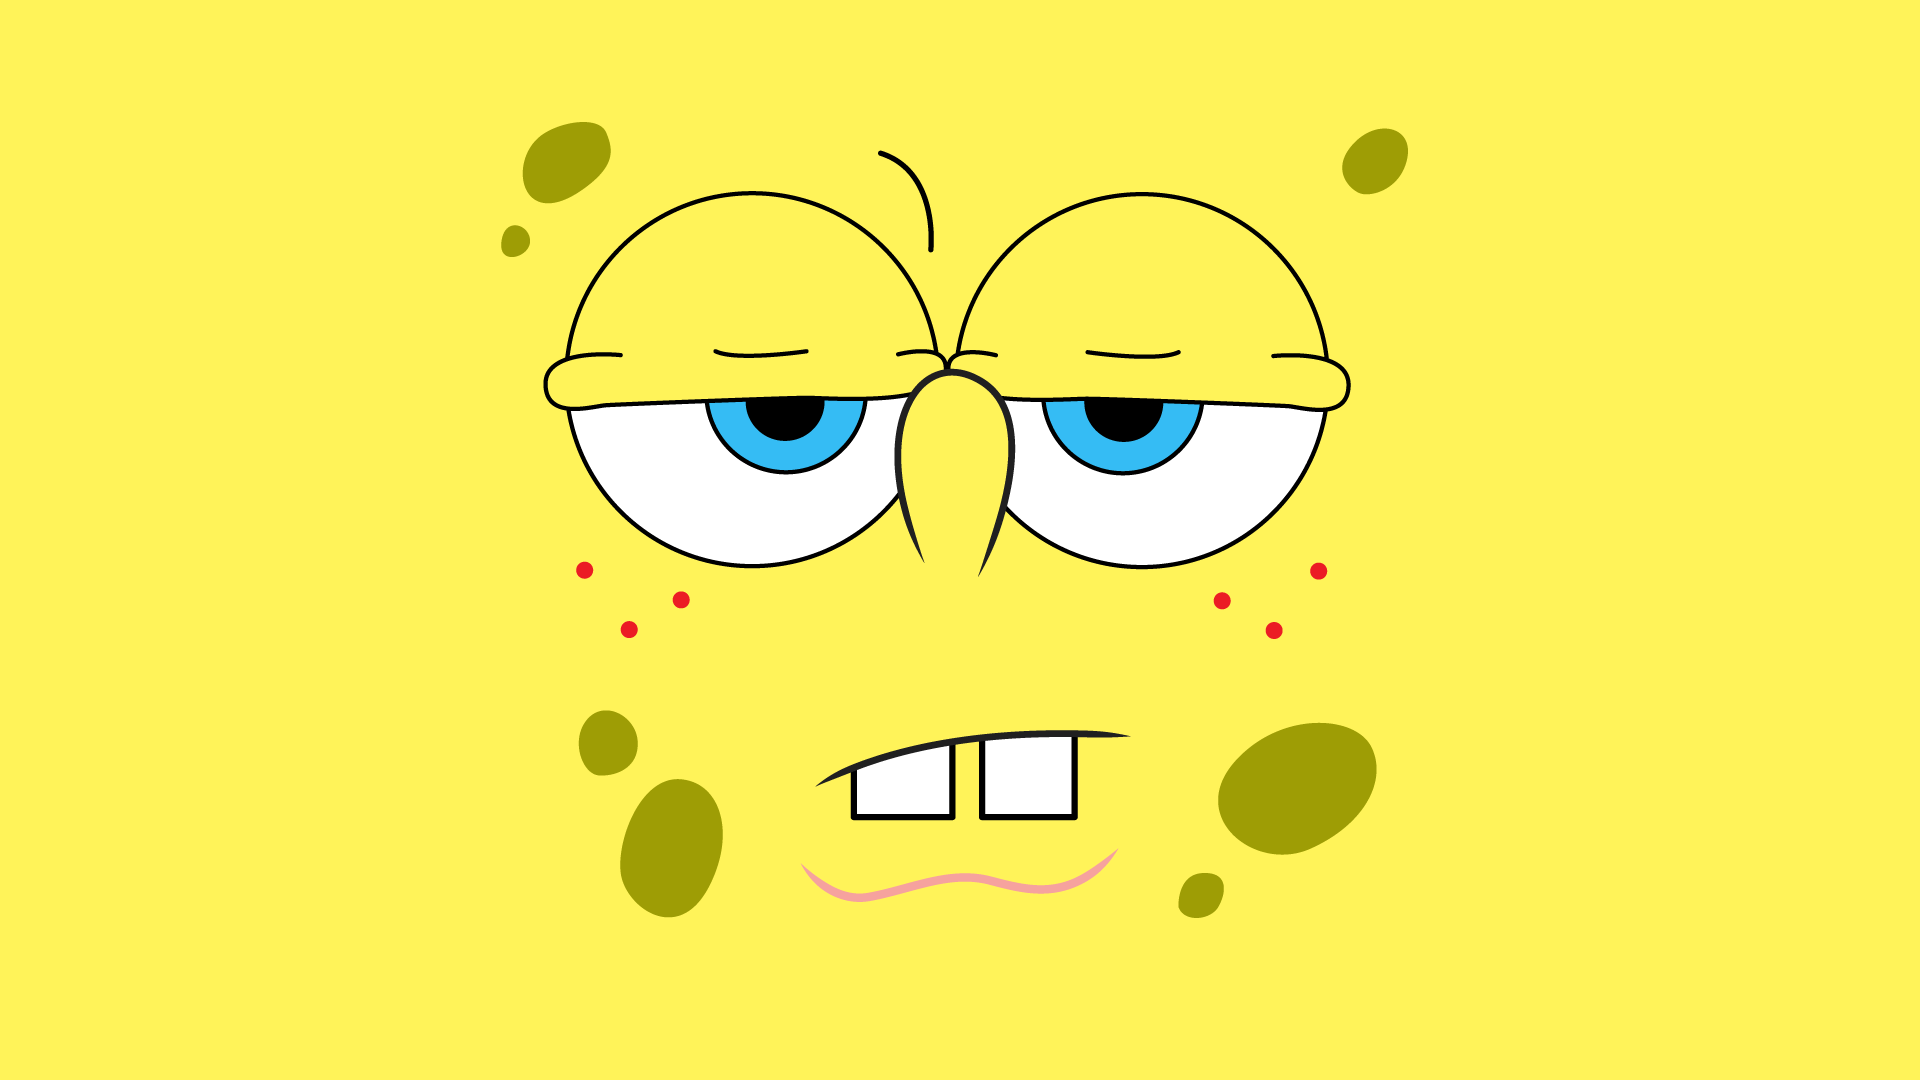 Spongebob Squarepants is a beloved cartoon character and this wallpaper features a cute illustration of him. - SpongeBob